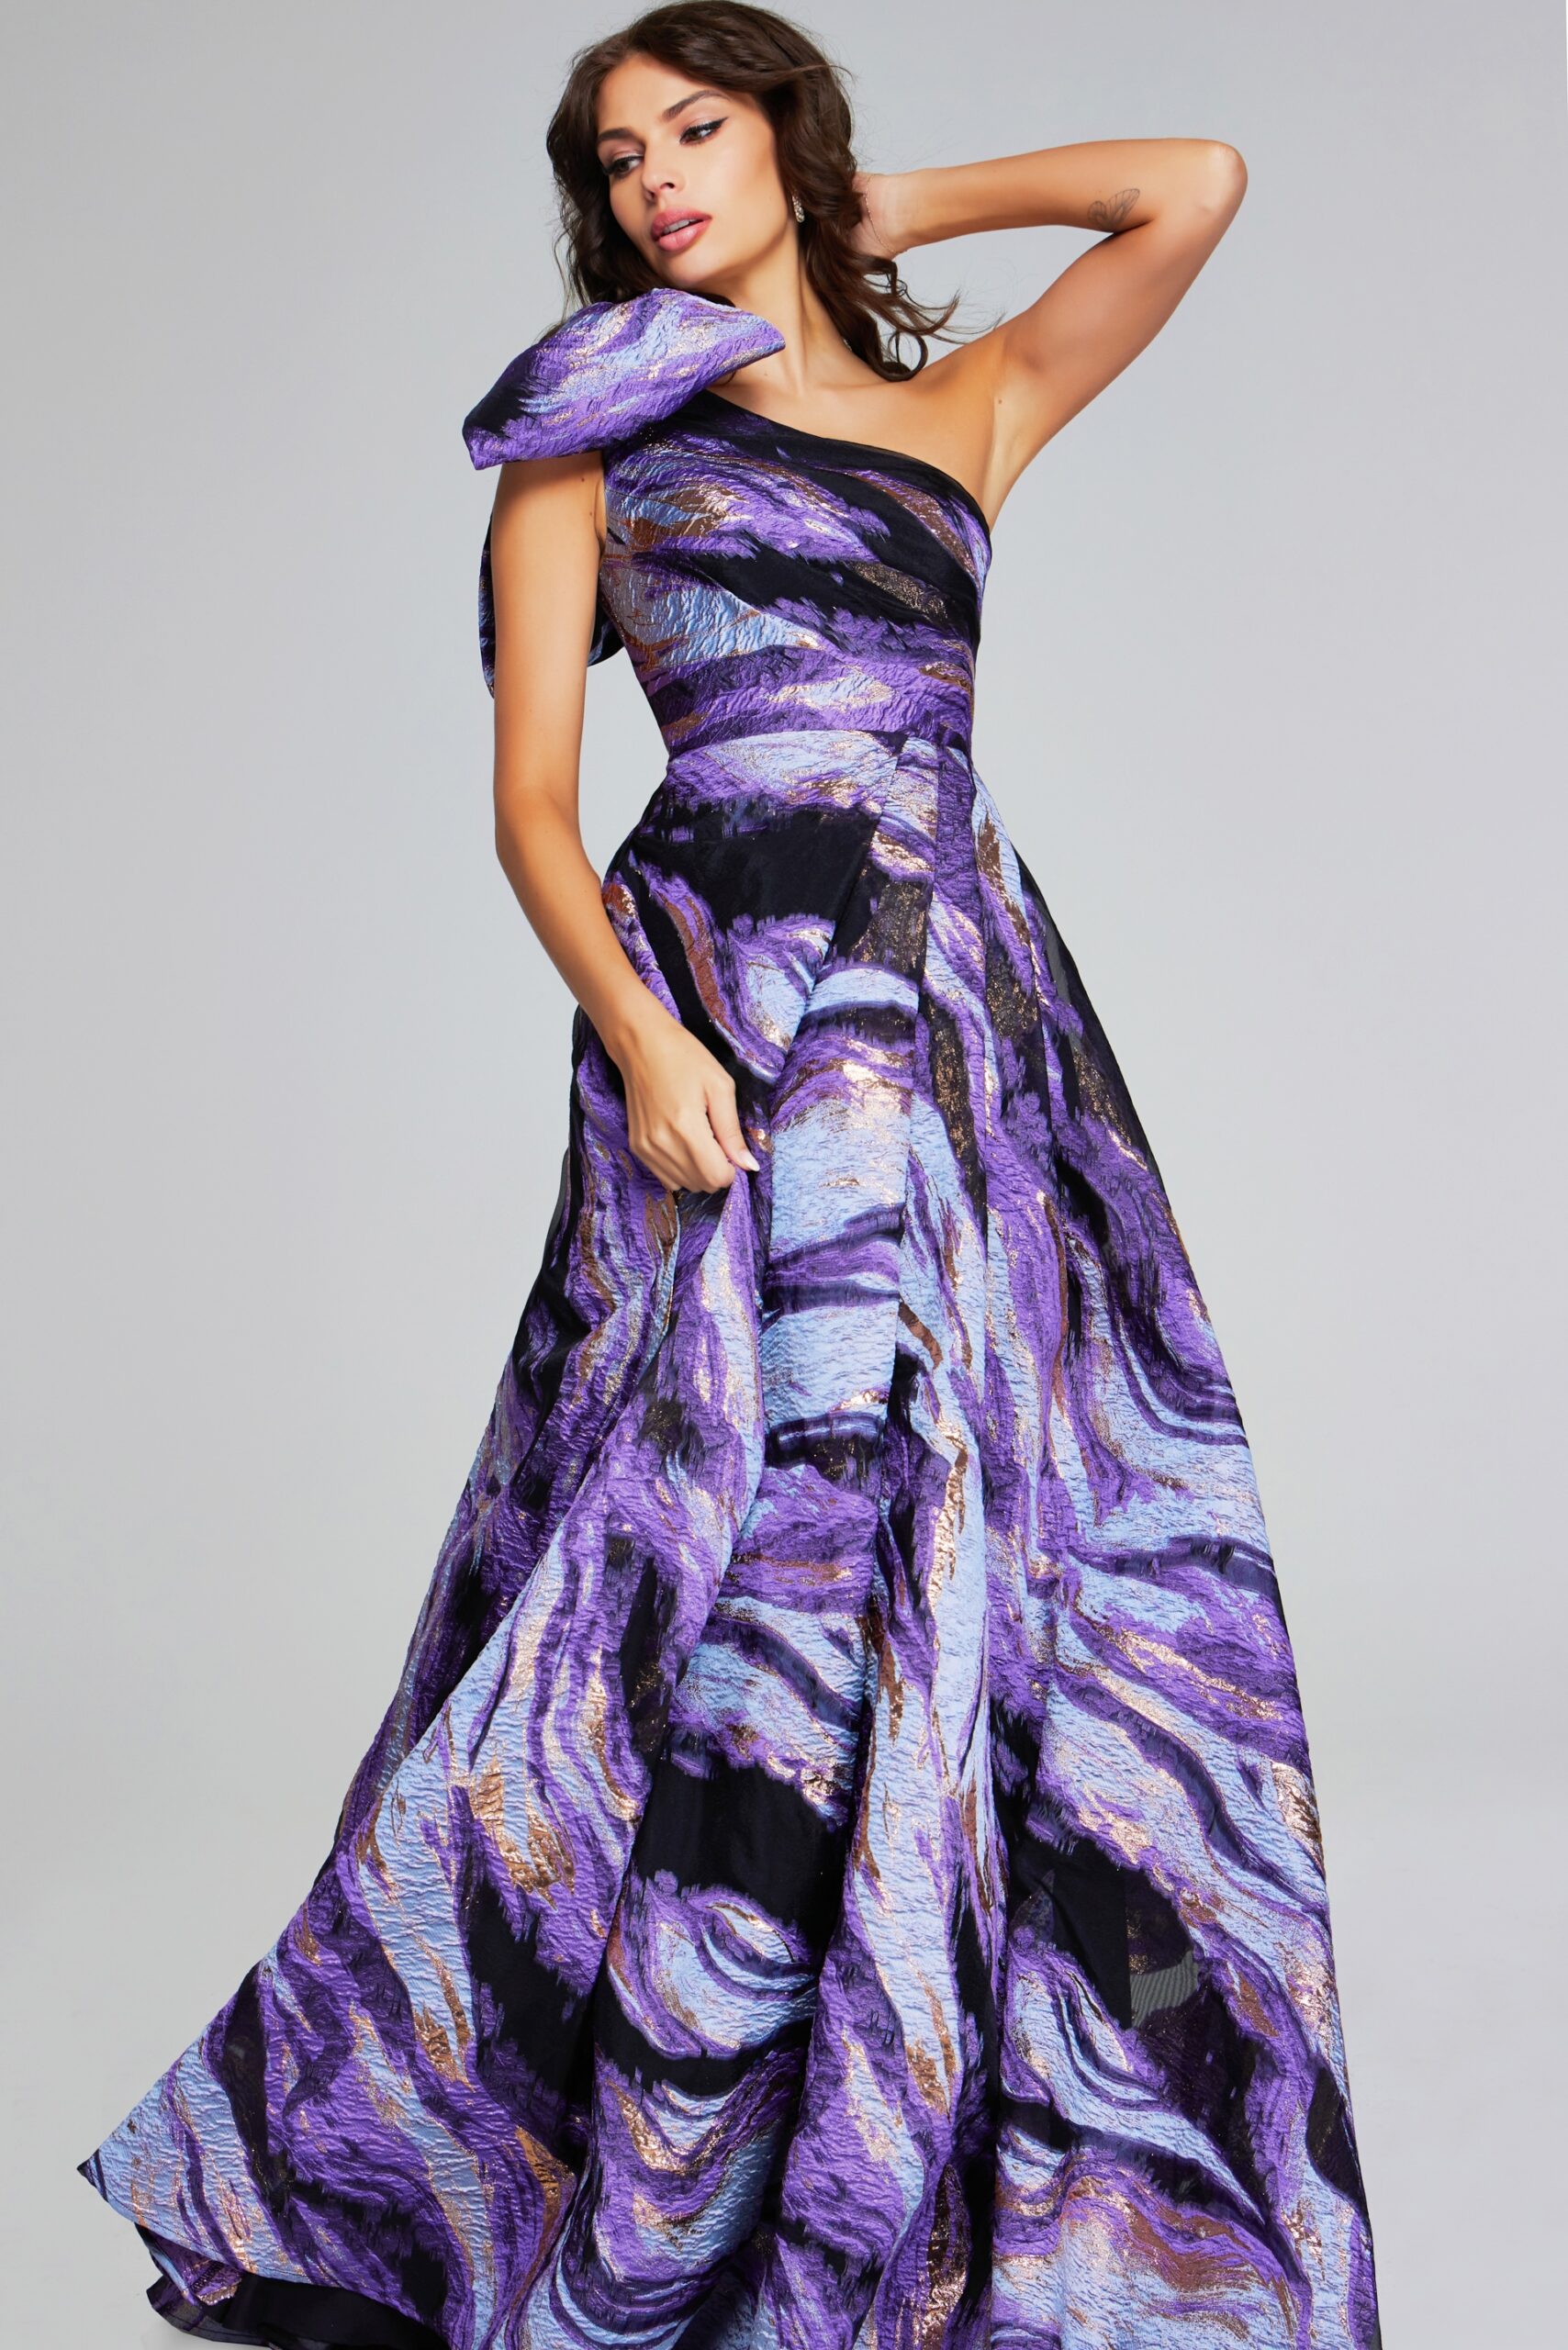 Model wearing Vibrant Purple Multi-Print One-Shoulder Gown with Bow Detail 40695